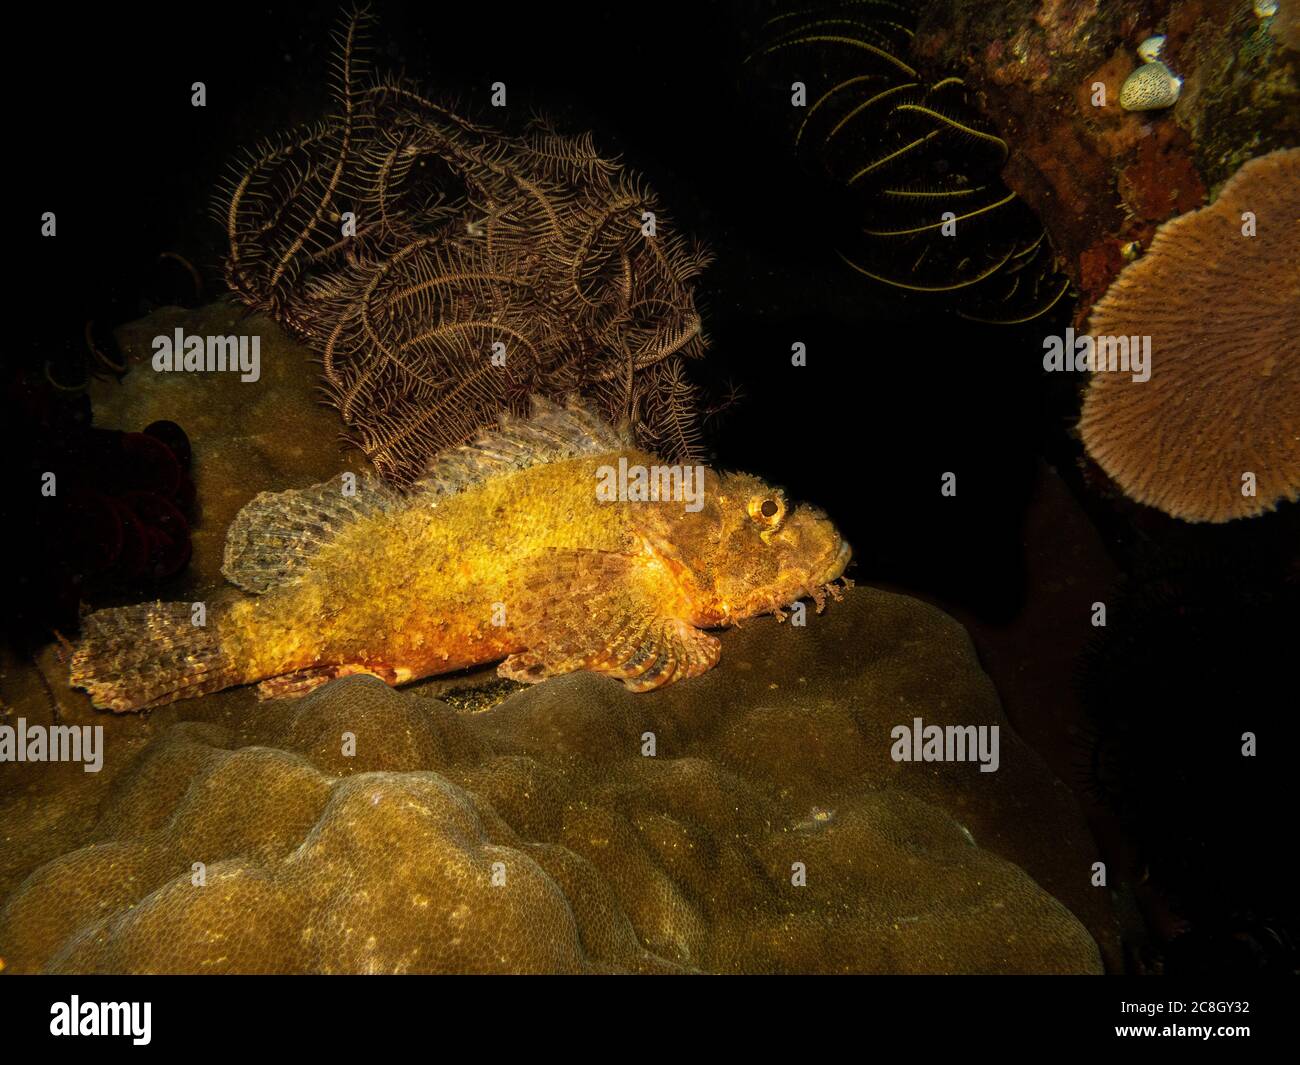 An amazing Scorpionfish or Scorpaenidae at a Puerto Galera tropical coral reef in the Philippines Stock Photo